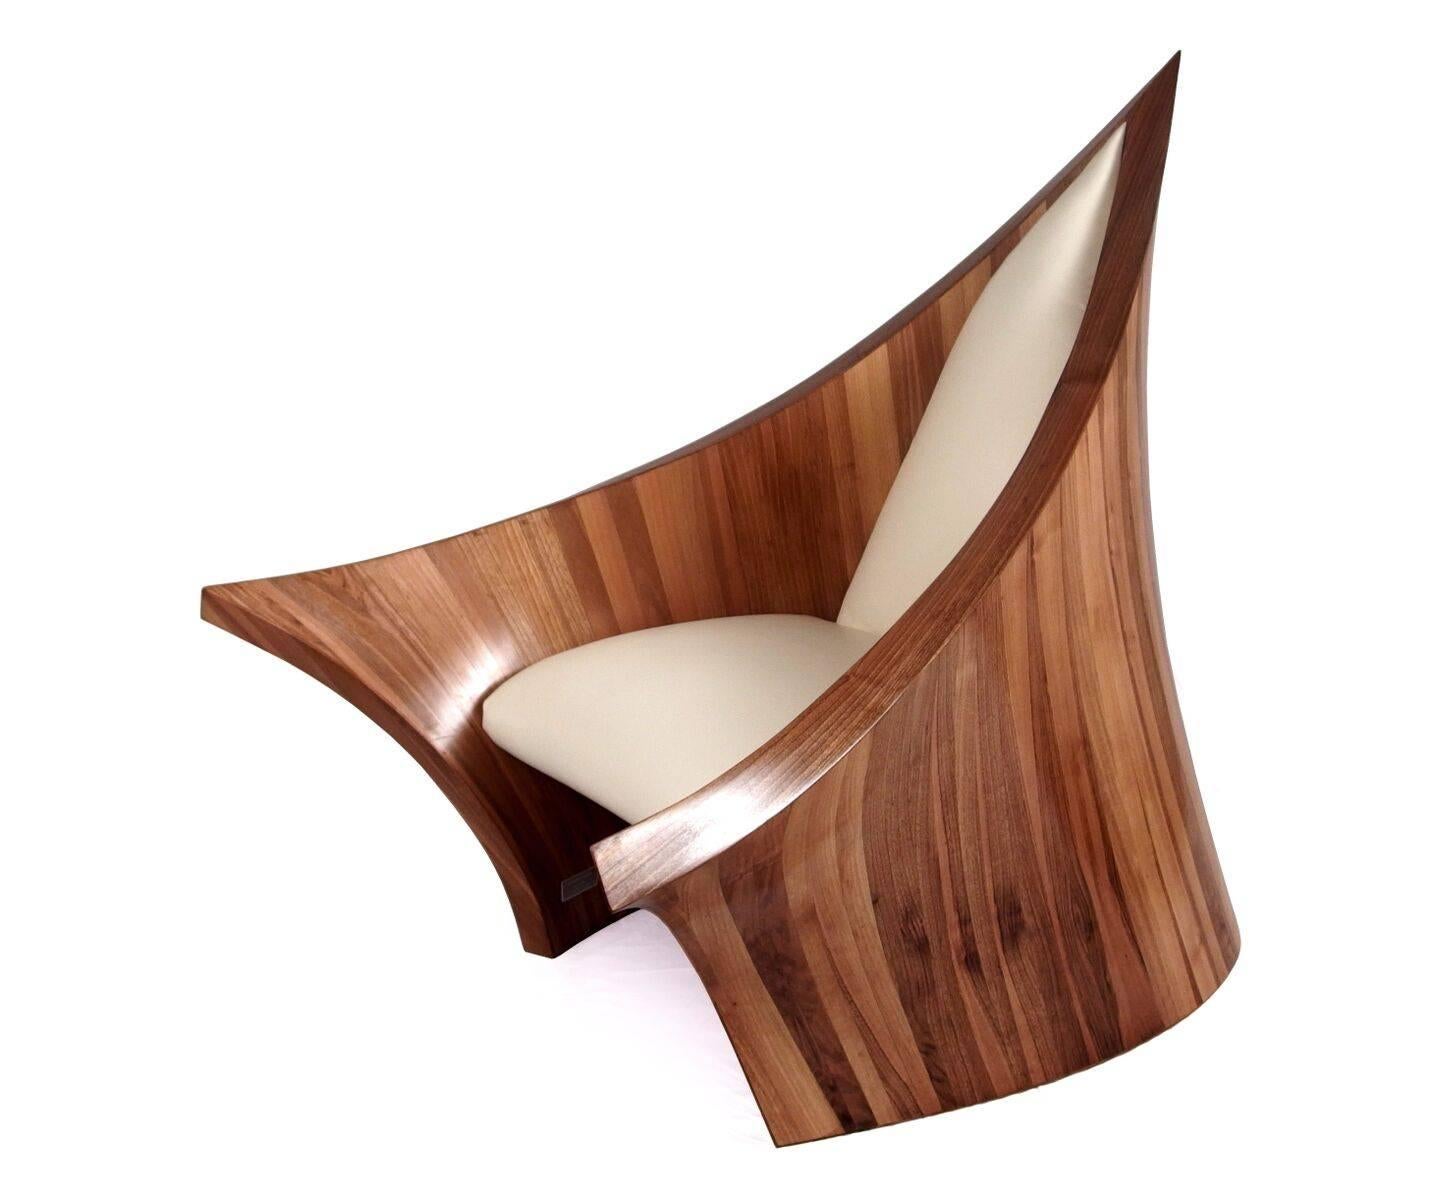 Organic Modern New Medieval Chair by Massimo Farina